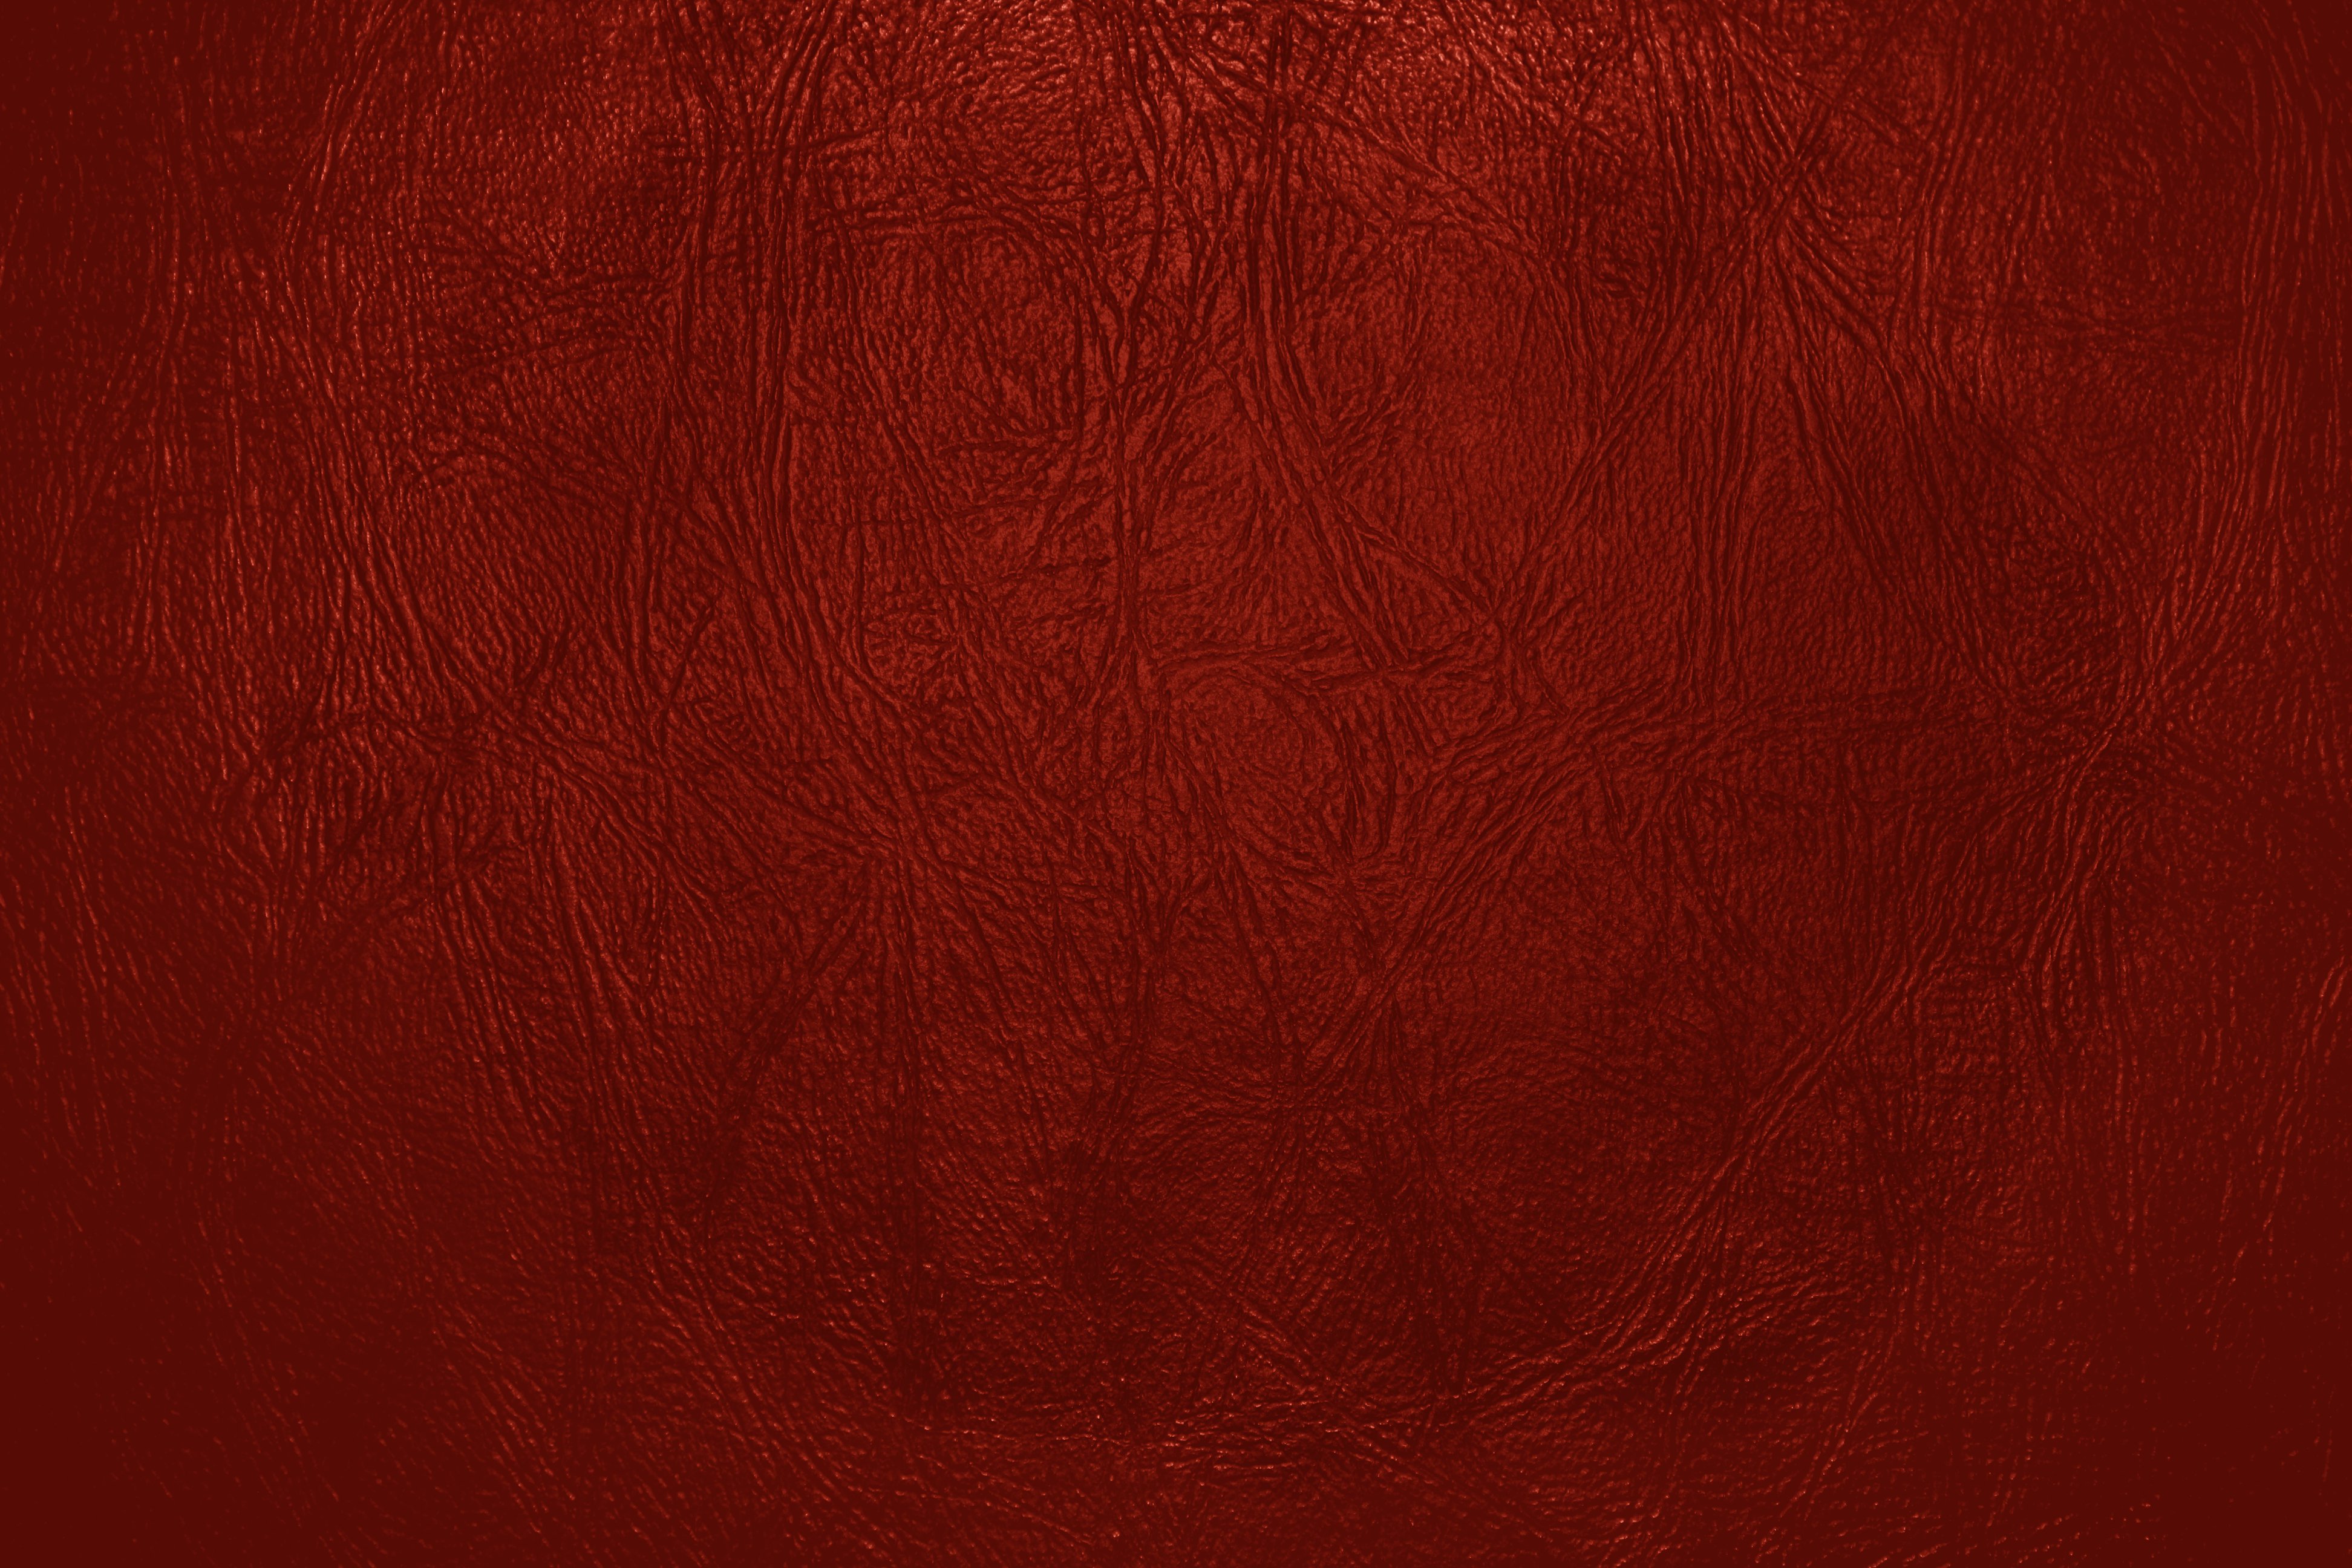 Red Leather Close Up Texture Picture Free Photograph Photos Public